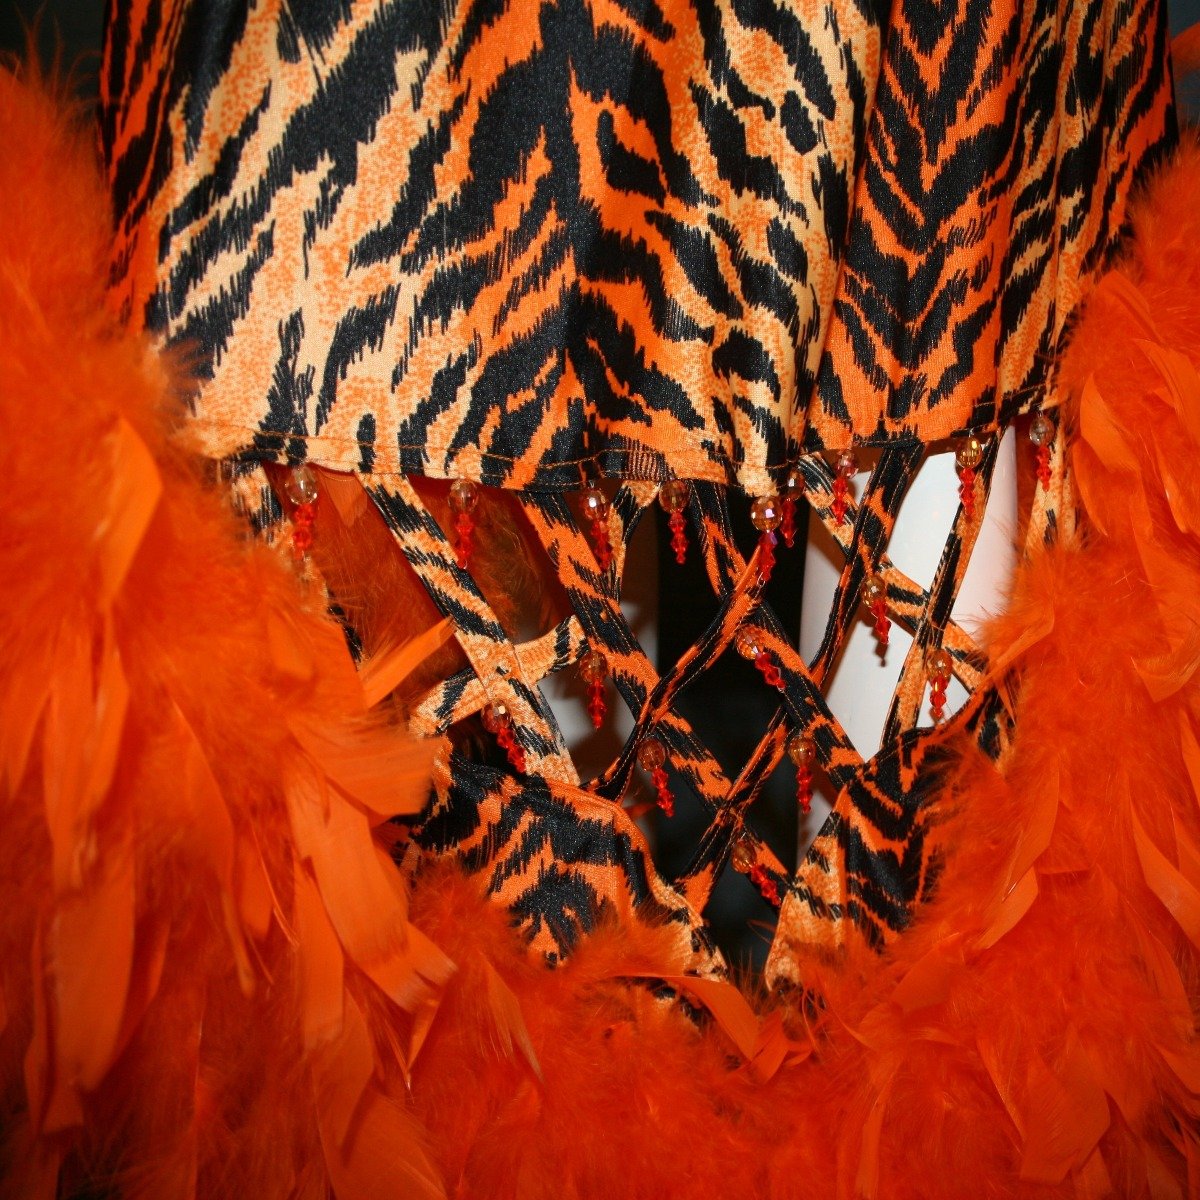 Crystal's Creations close up details view of  Tiger print & orange Latin/rhythm dress created of tiger print lycra & luxurious orange solid slinky has color blocking, lattice work detailing in front bodice, split sides & low back, as well as intriguing longer back skirting, adorned with orange chandelle feathers, also features detailed Swarovski rhinestone work!